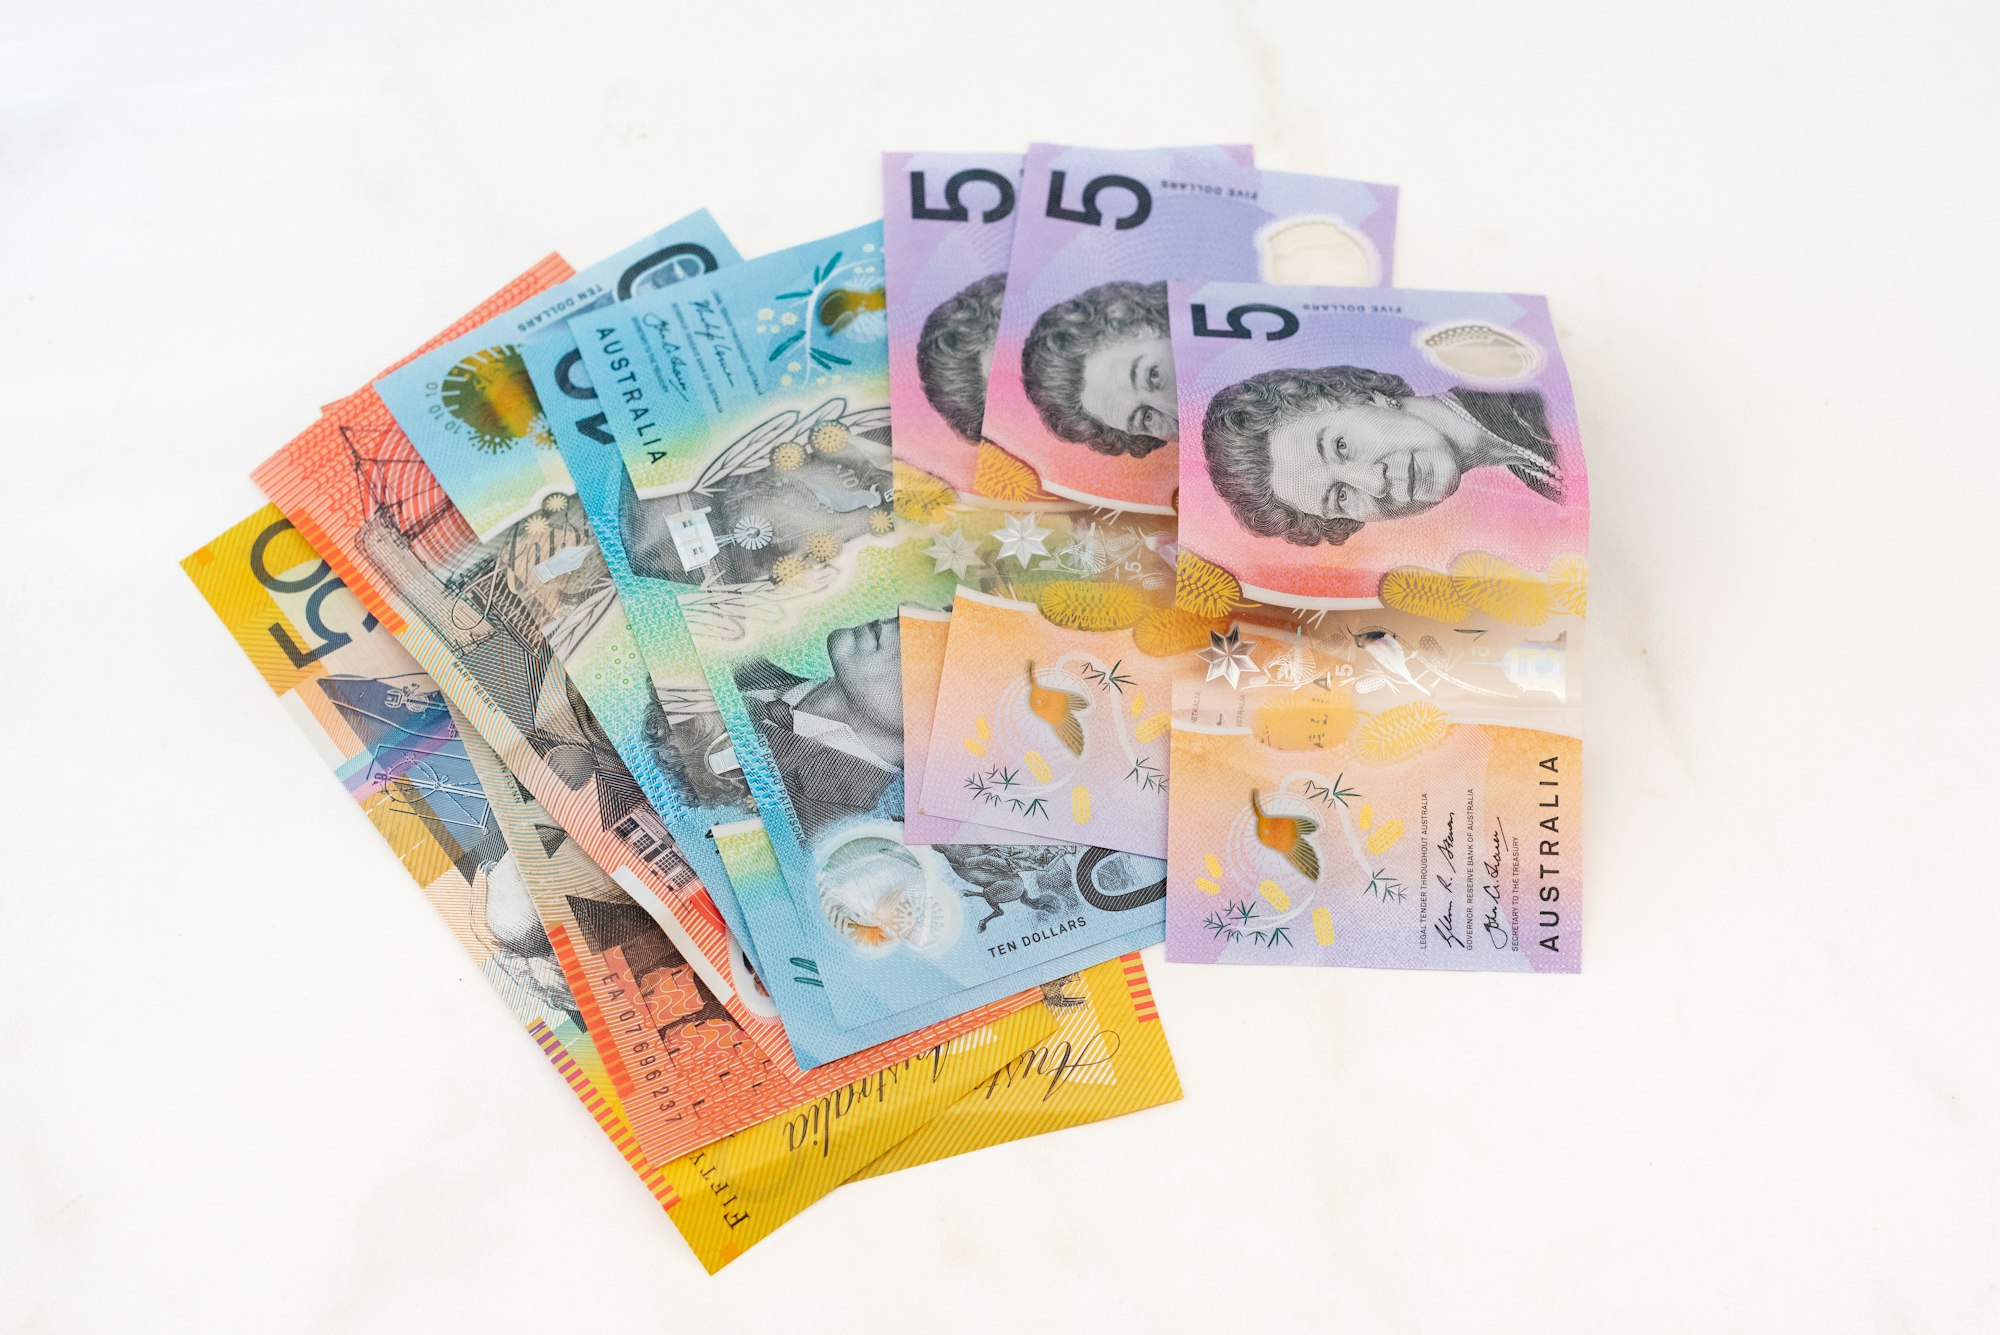 A few Australian money (AUD) stock photos we are ALWAYS looking for around here. Maybe you’ll find them useful too.